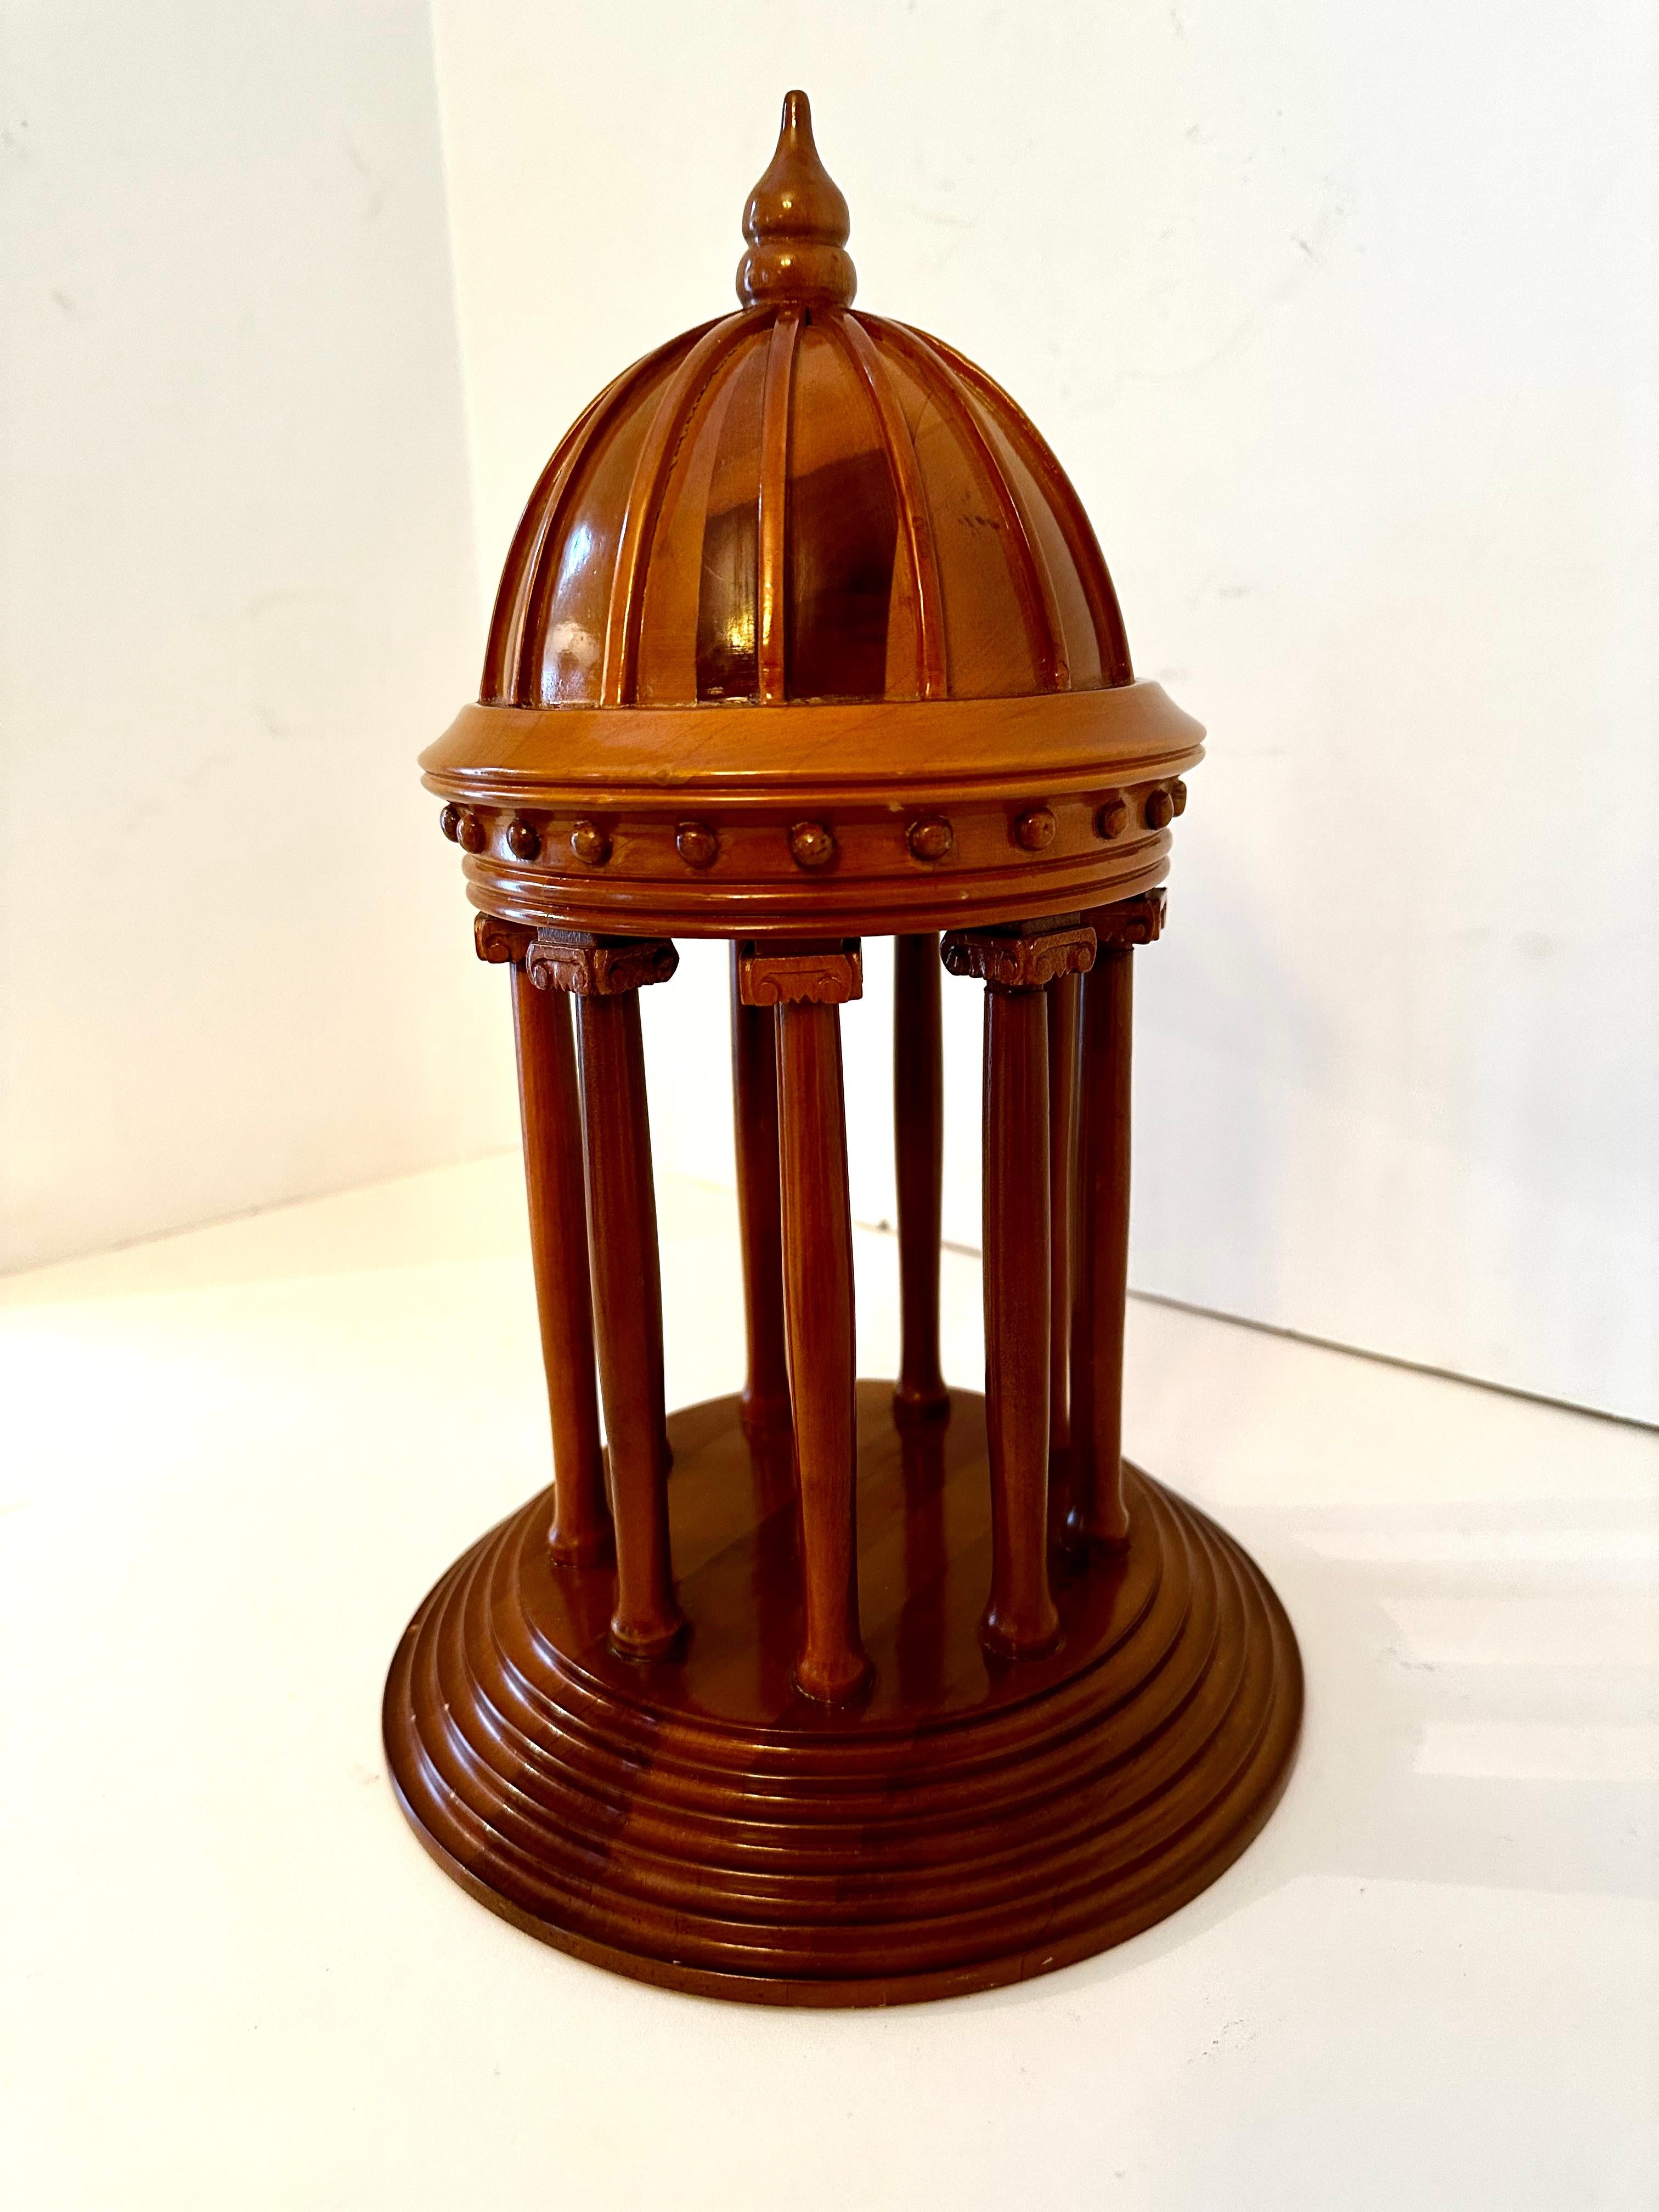 American Classical Wooden Domed Architectural Model